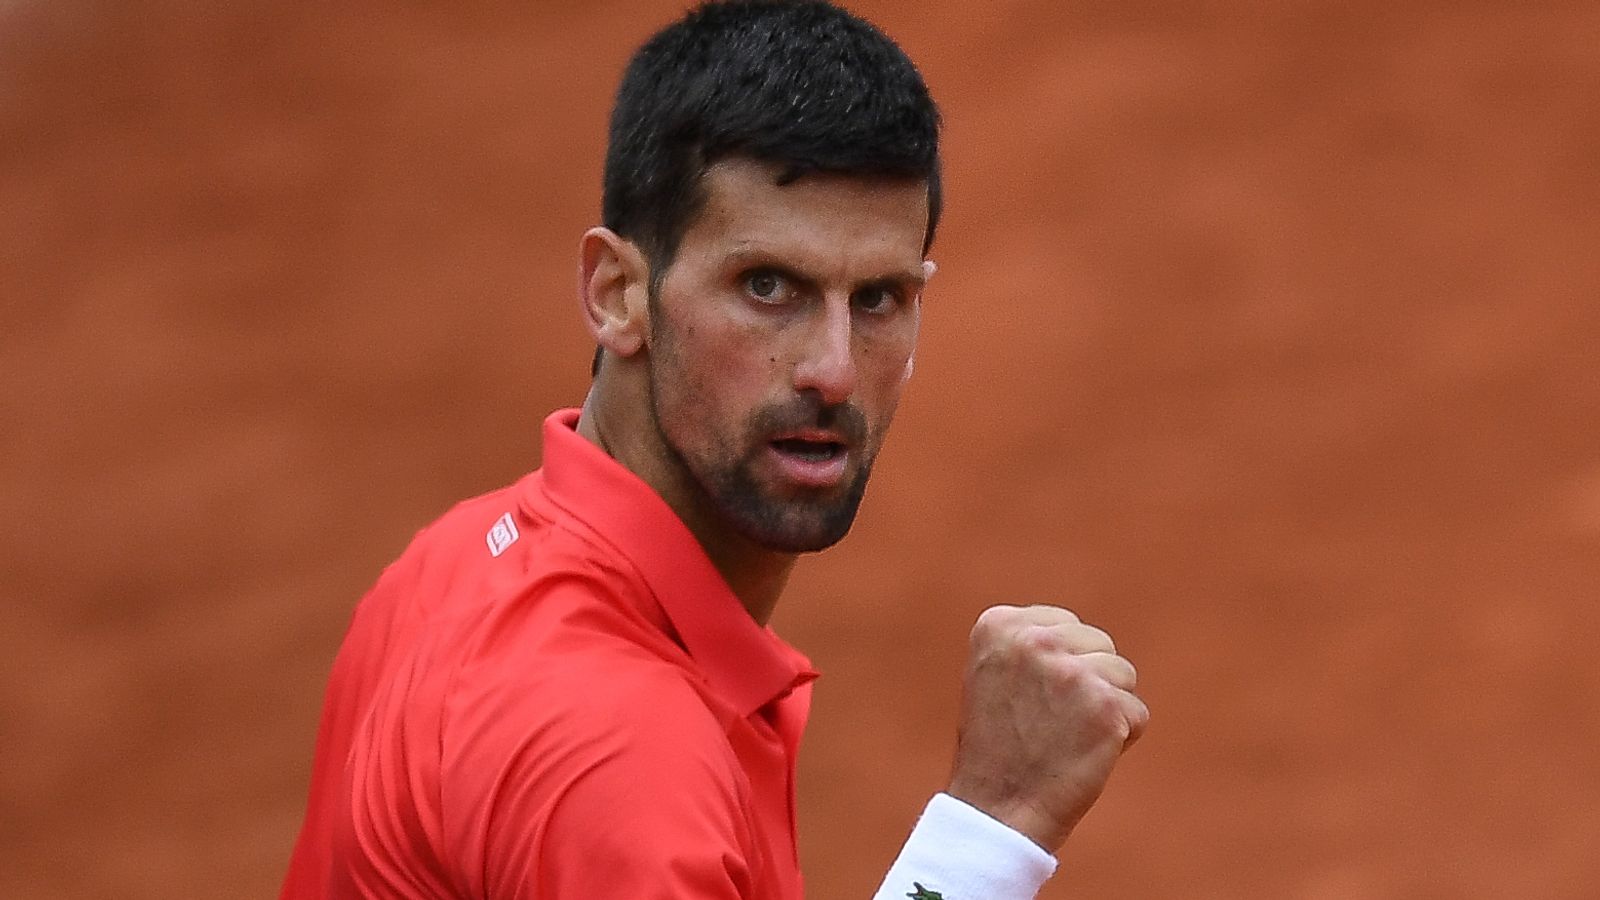 French Open: Novak Djokovic through to quarter-finals with potential clash against Rafael Nadal